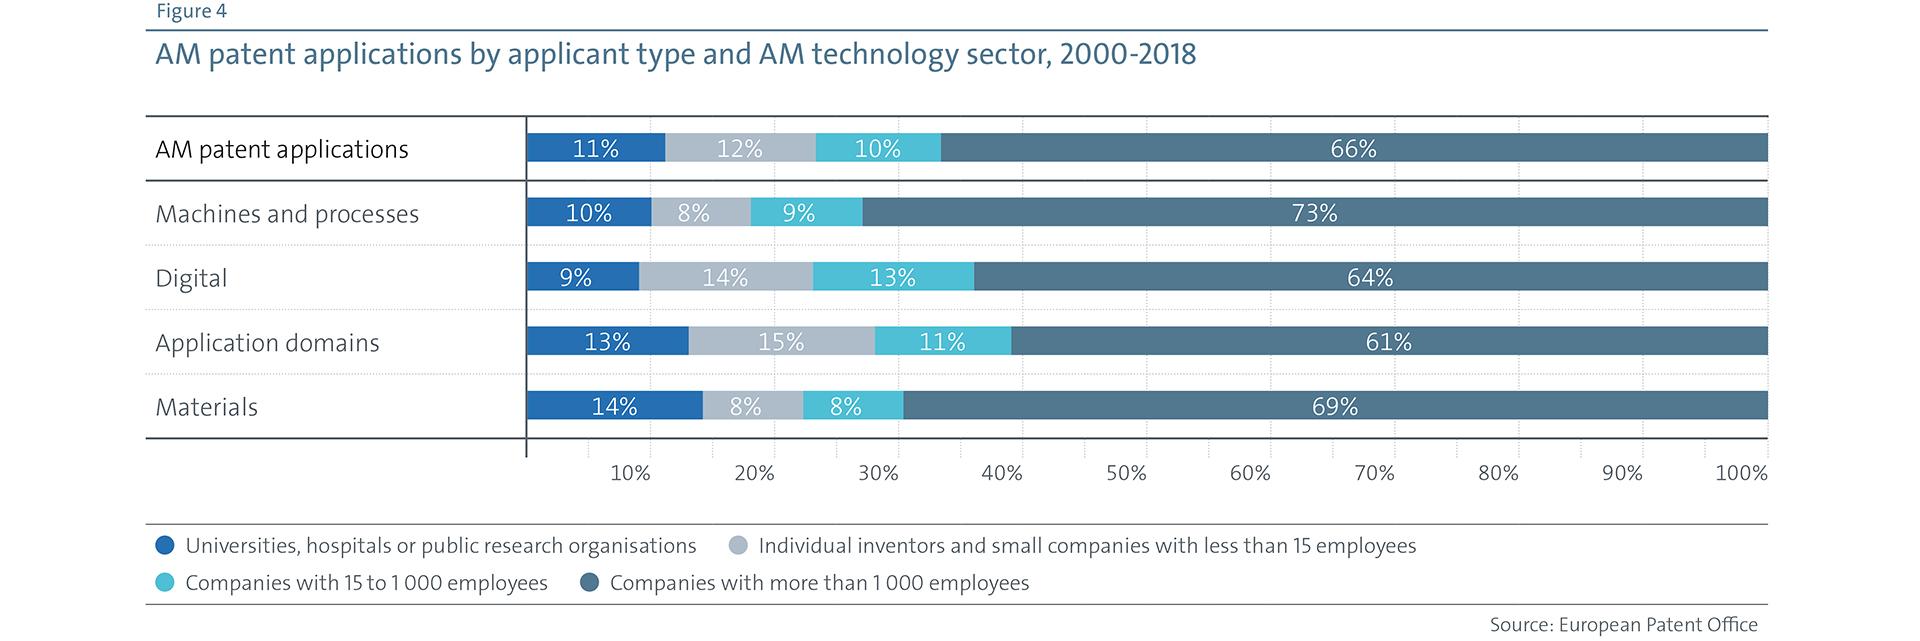 AM patent applications by applicat type and technology